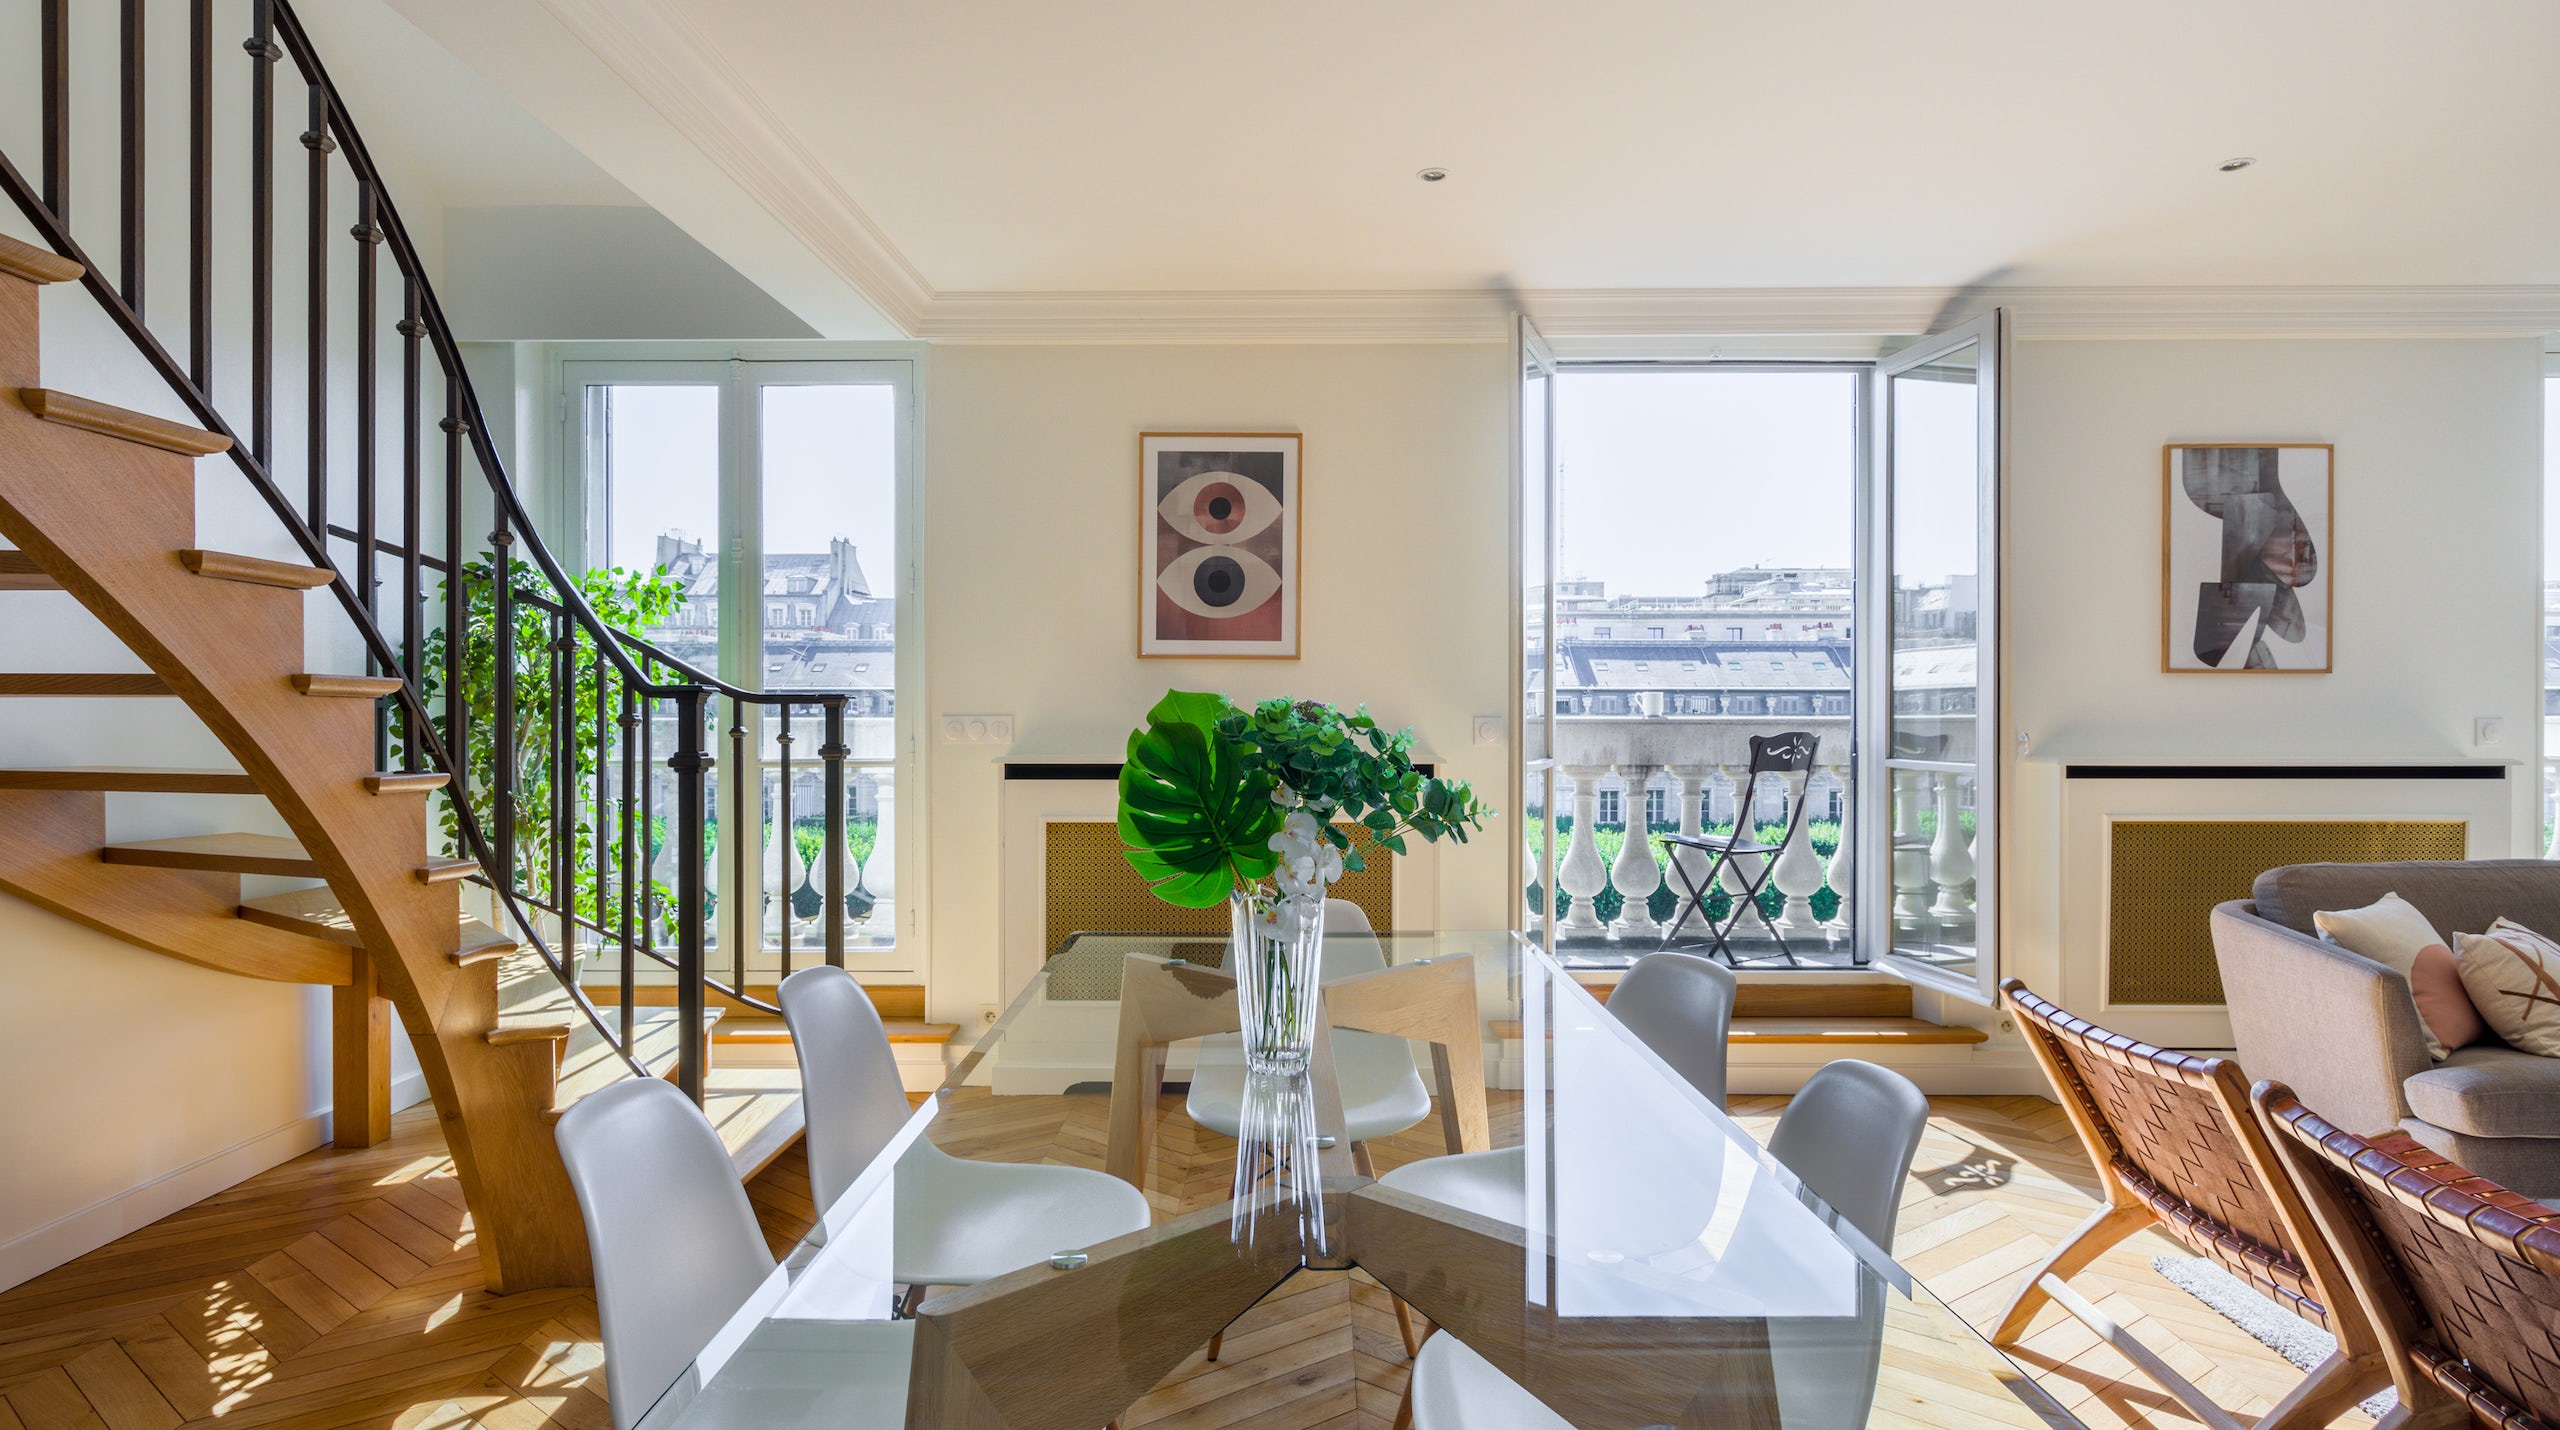 Dining room flanked by salon and staircase and overlooking the Jardin du Palais Royal in Paris